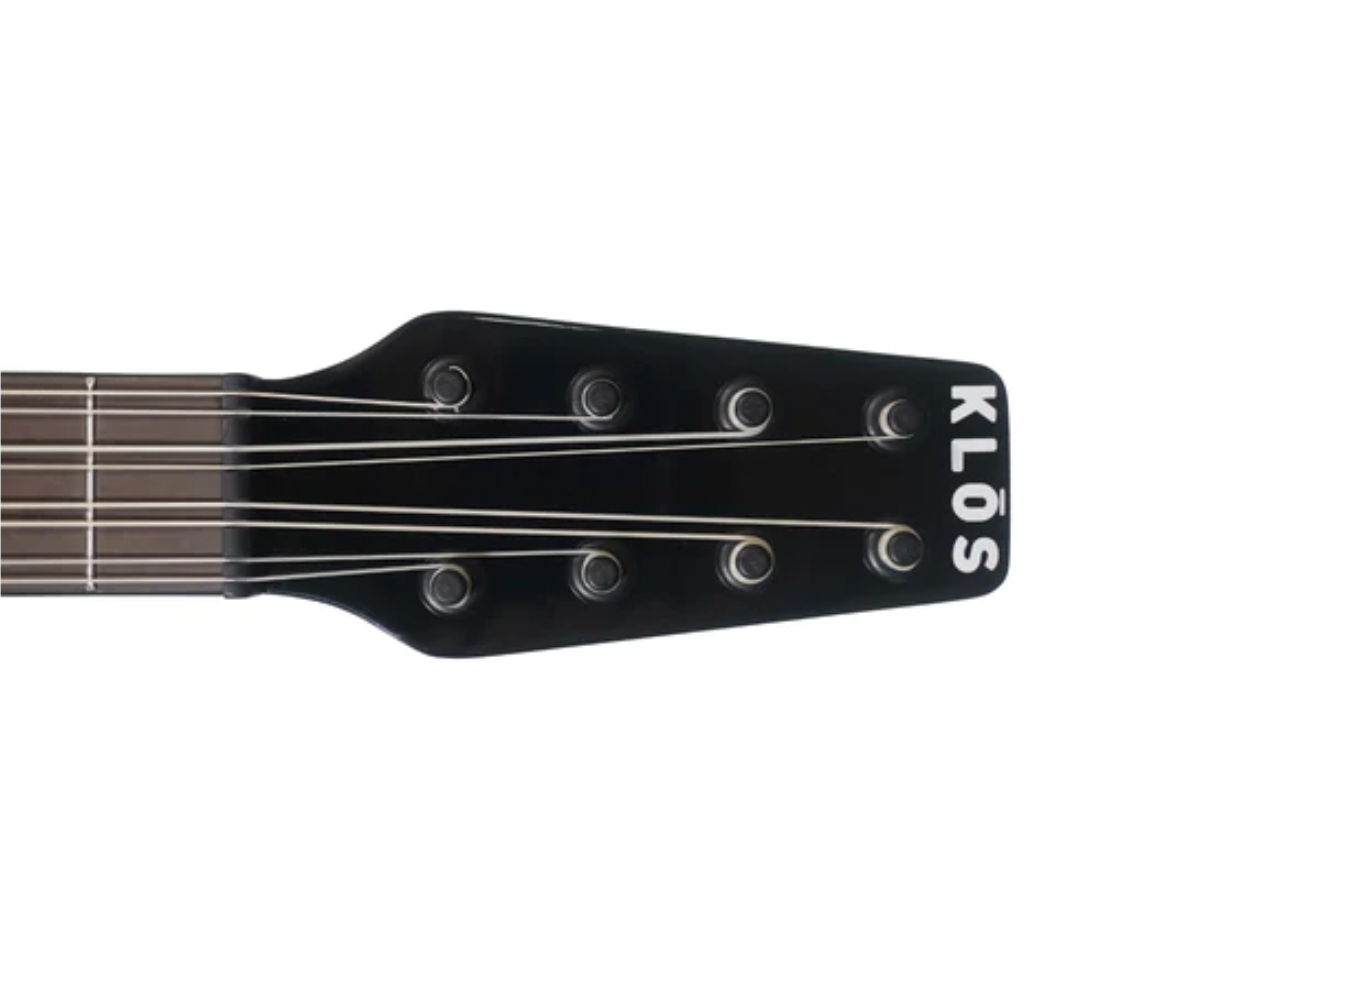 The KLŌS 8-string headstock flipped on its side 